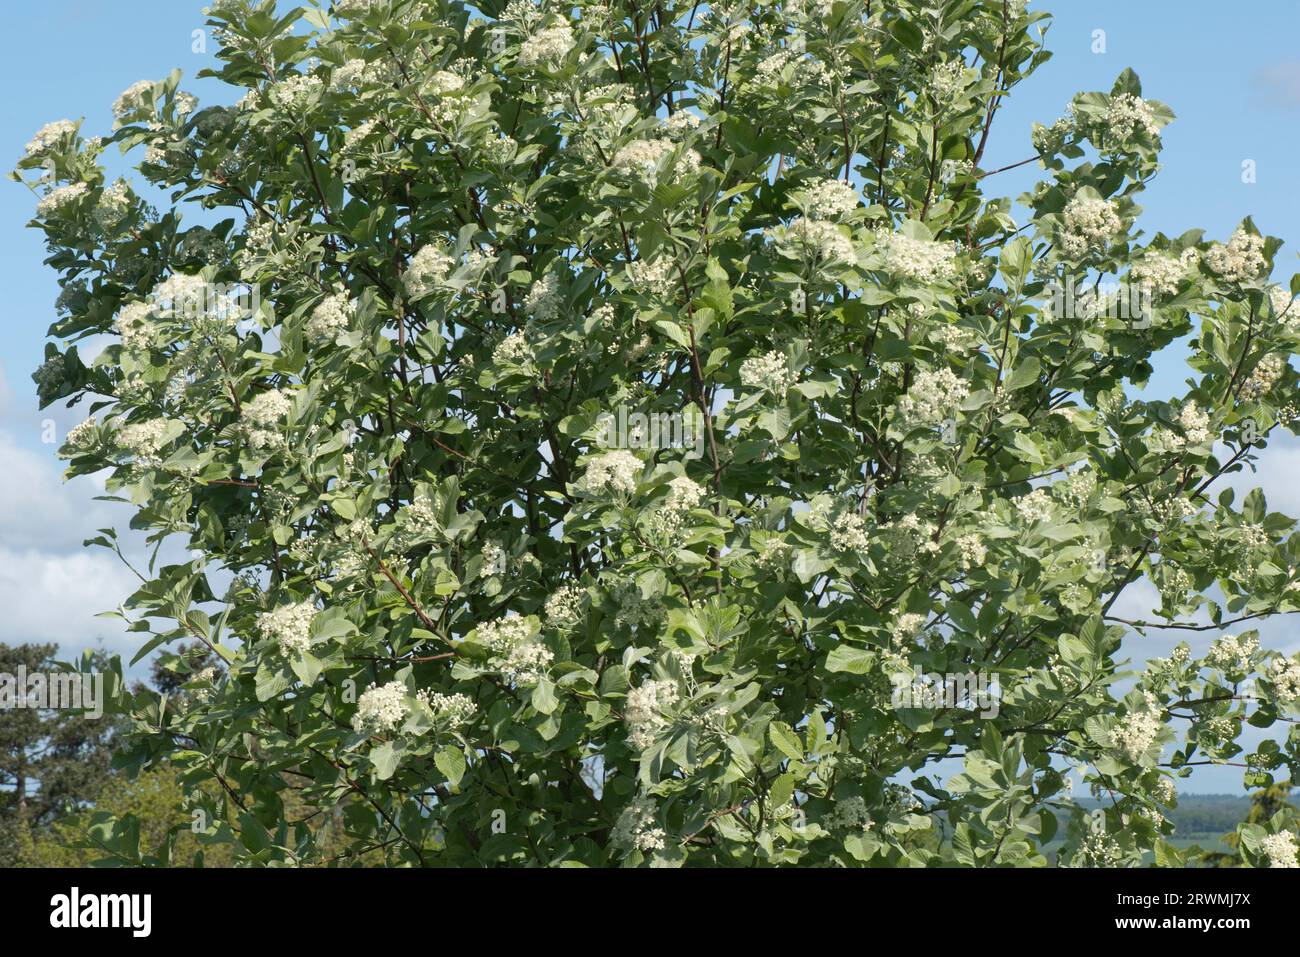 Whitebeam (Sorbus aria) tree with clusters of white flowers among young glaucous hairy leaves in spring, Berkshire, May Stock Photo